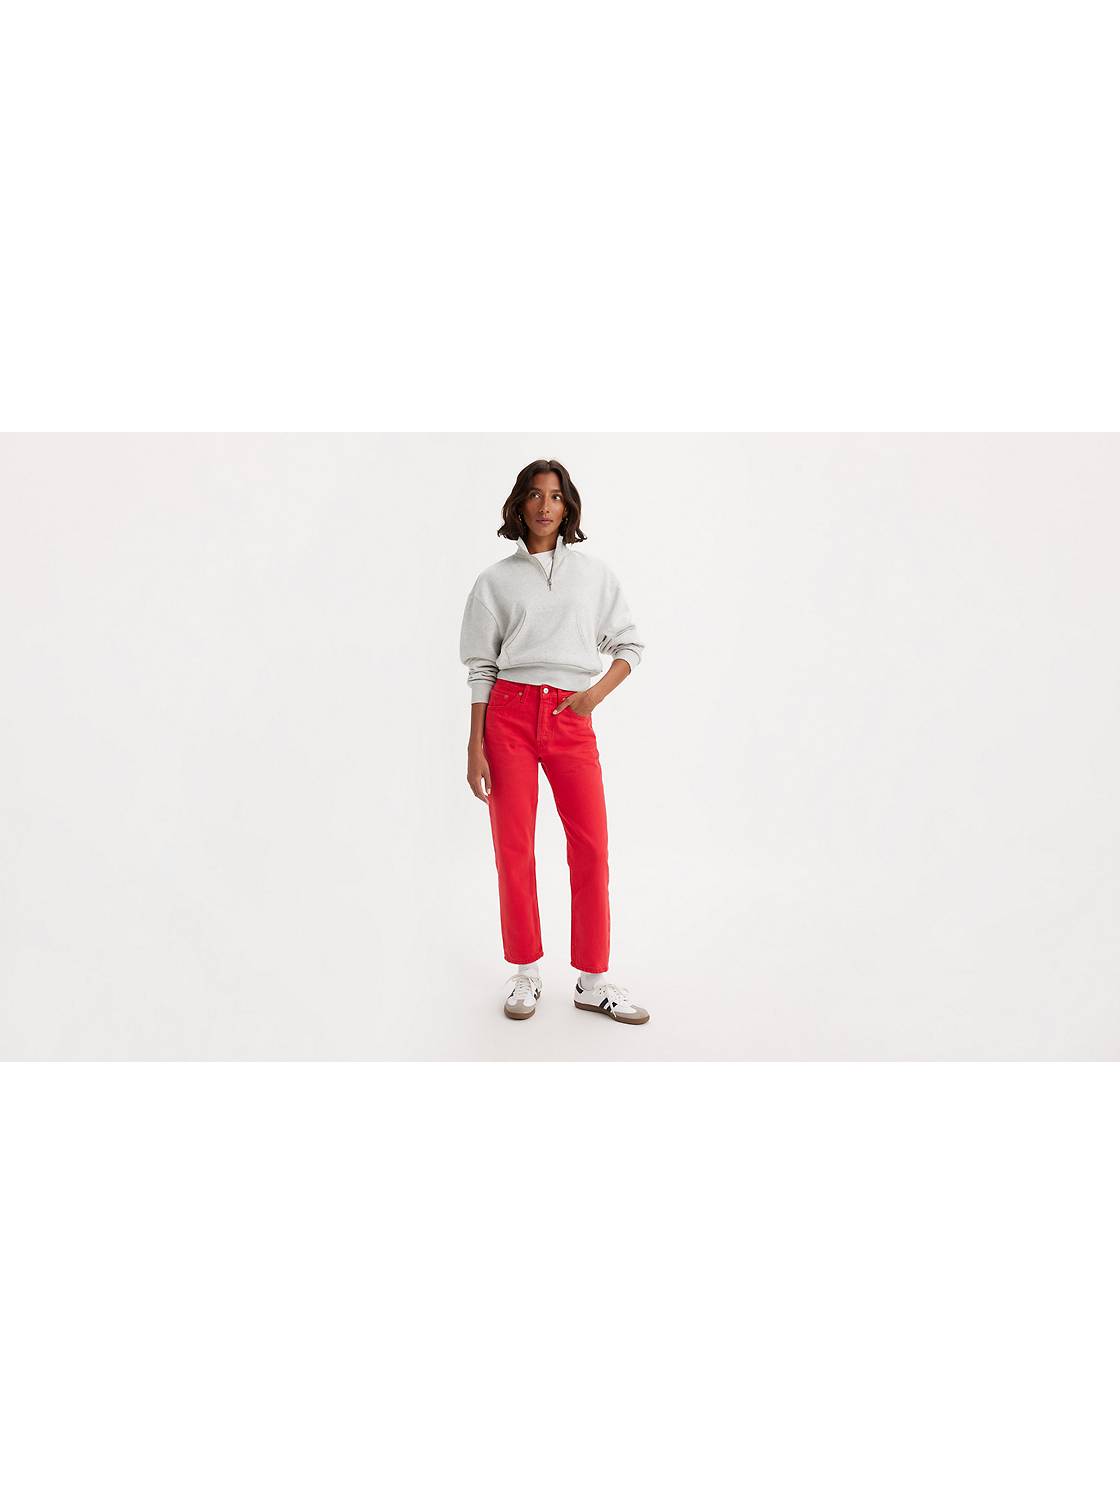 Women's Red Jeans - Shop Red Jeans & Pants for Women